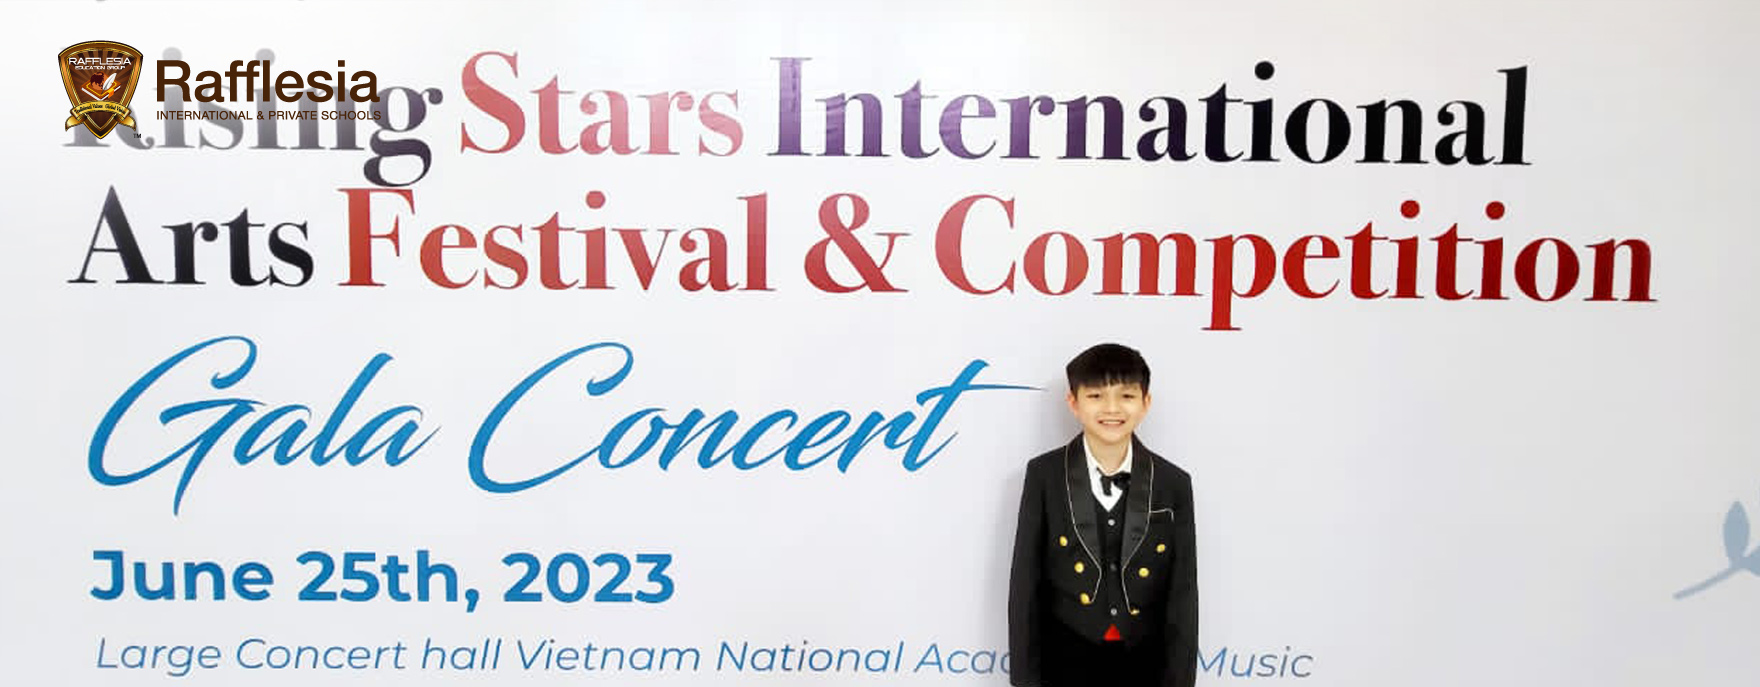 4th Annual Rising Stars International Arts Festival & Competition 2023